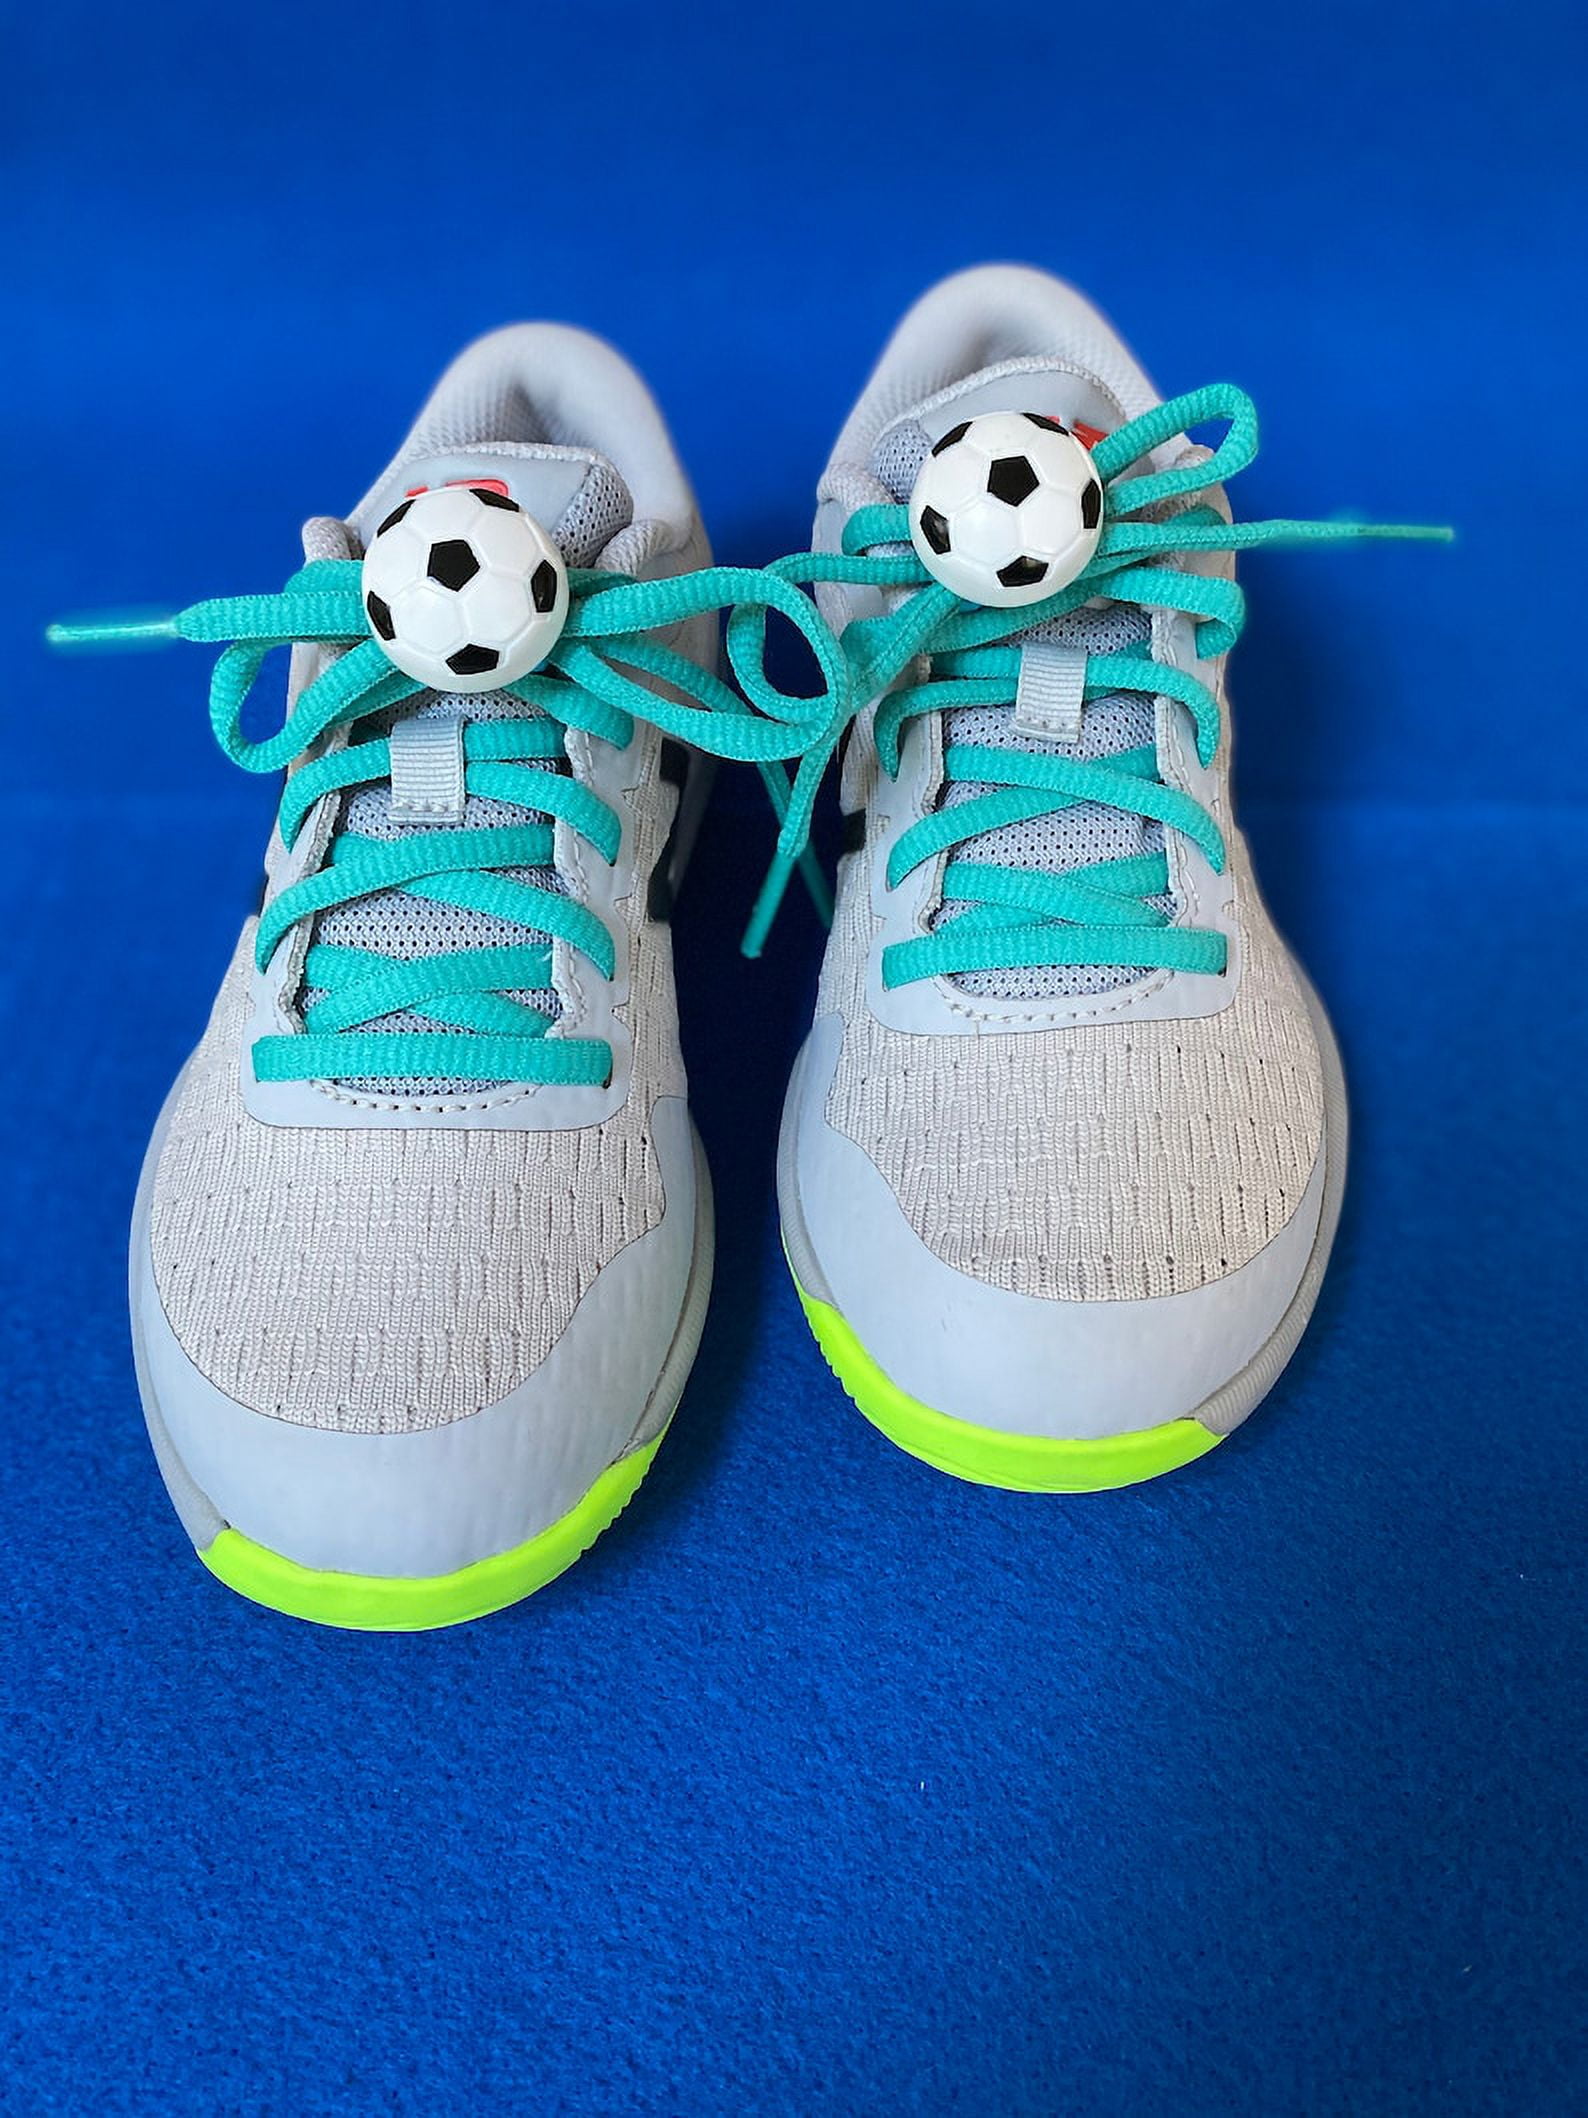 Shoelace locks - fun to wear and keep laces tied! 